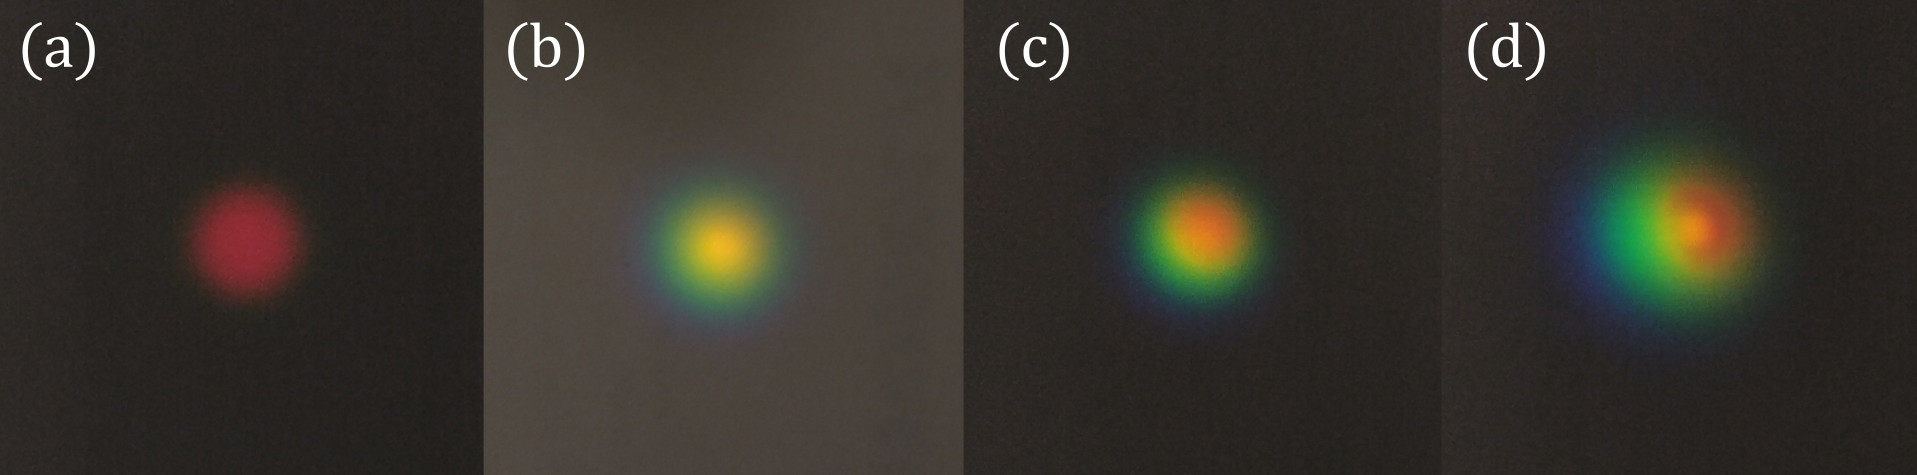 Photographs of white-light continuum generation using different seed intensities.